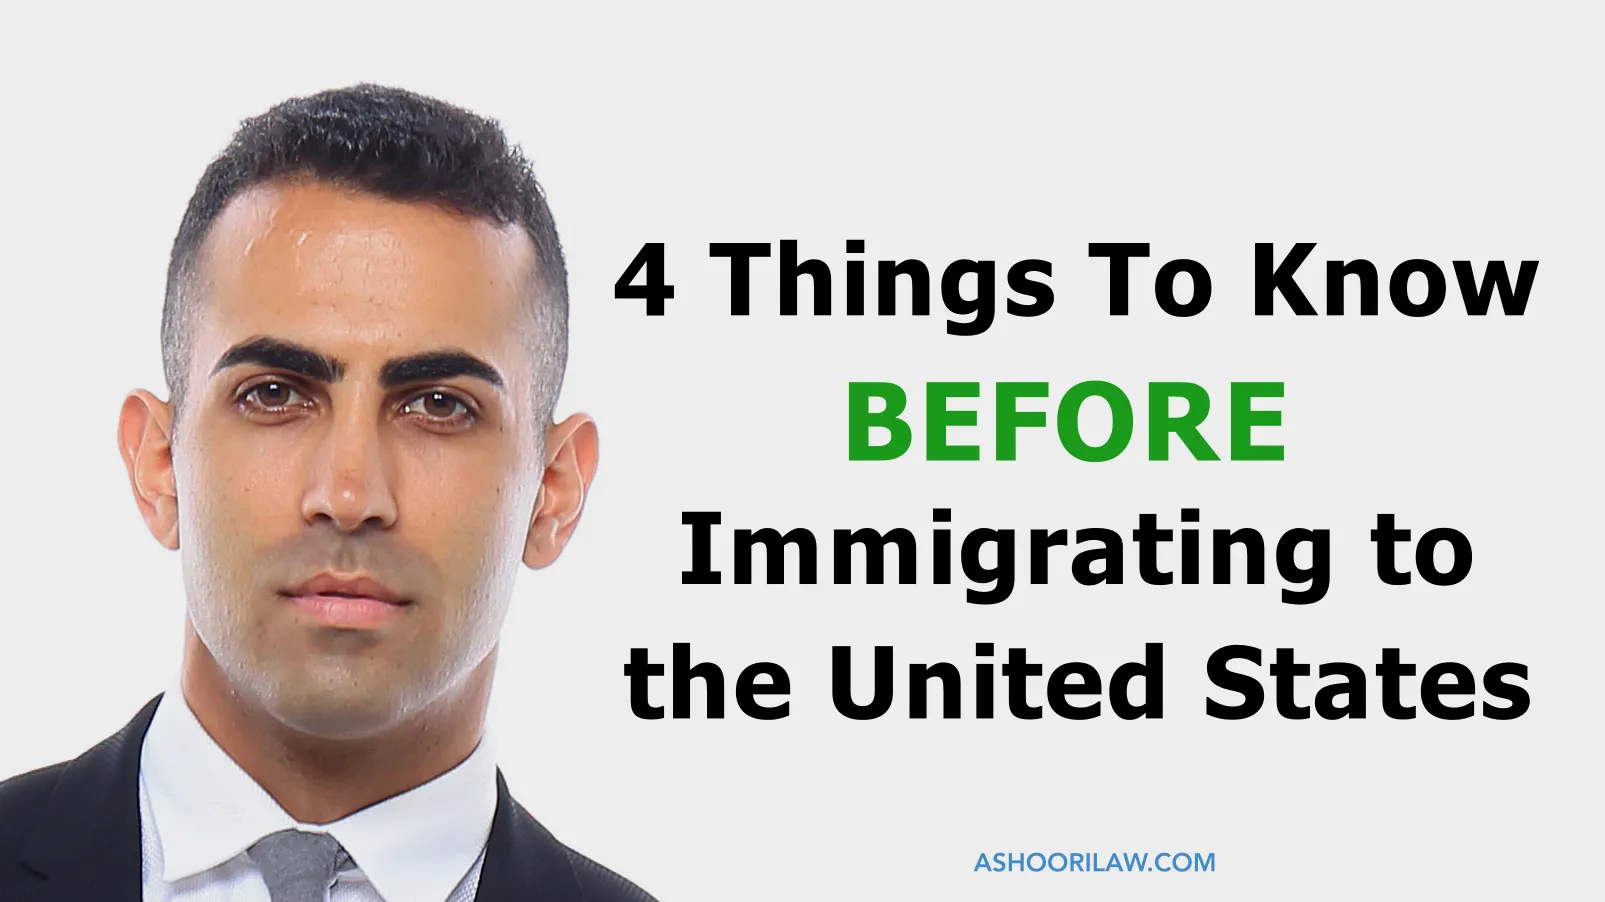 4 Things to Know Before Immigrating to the United States